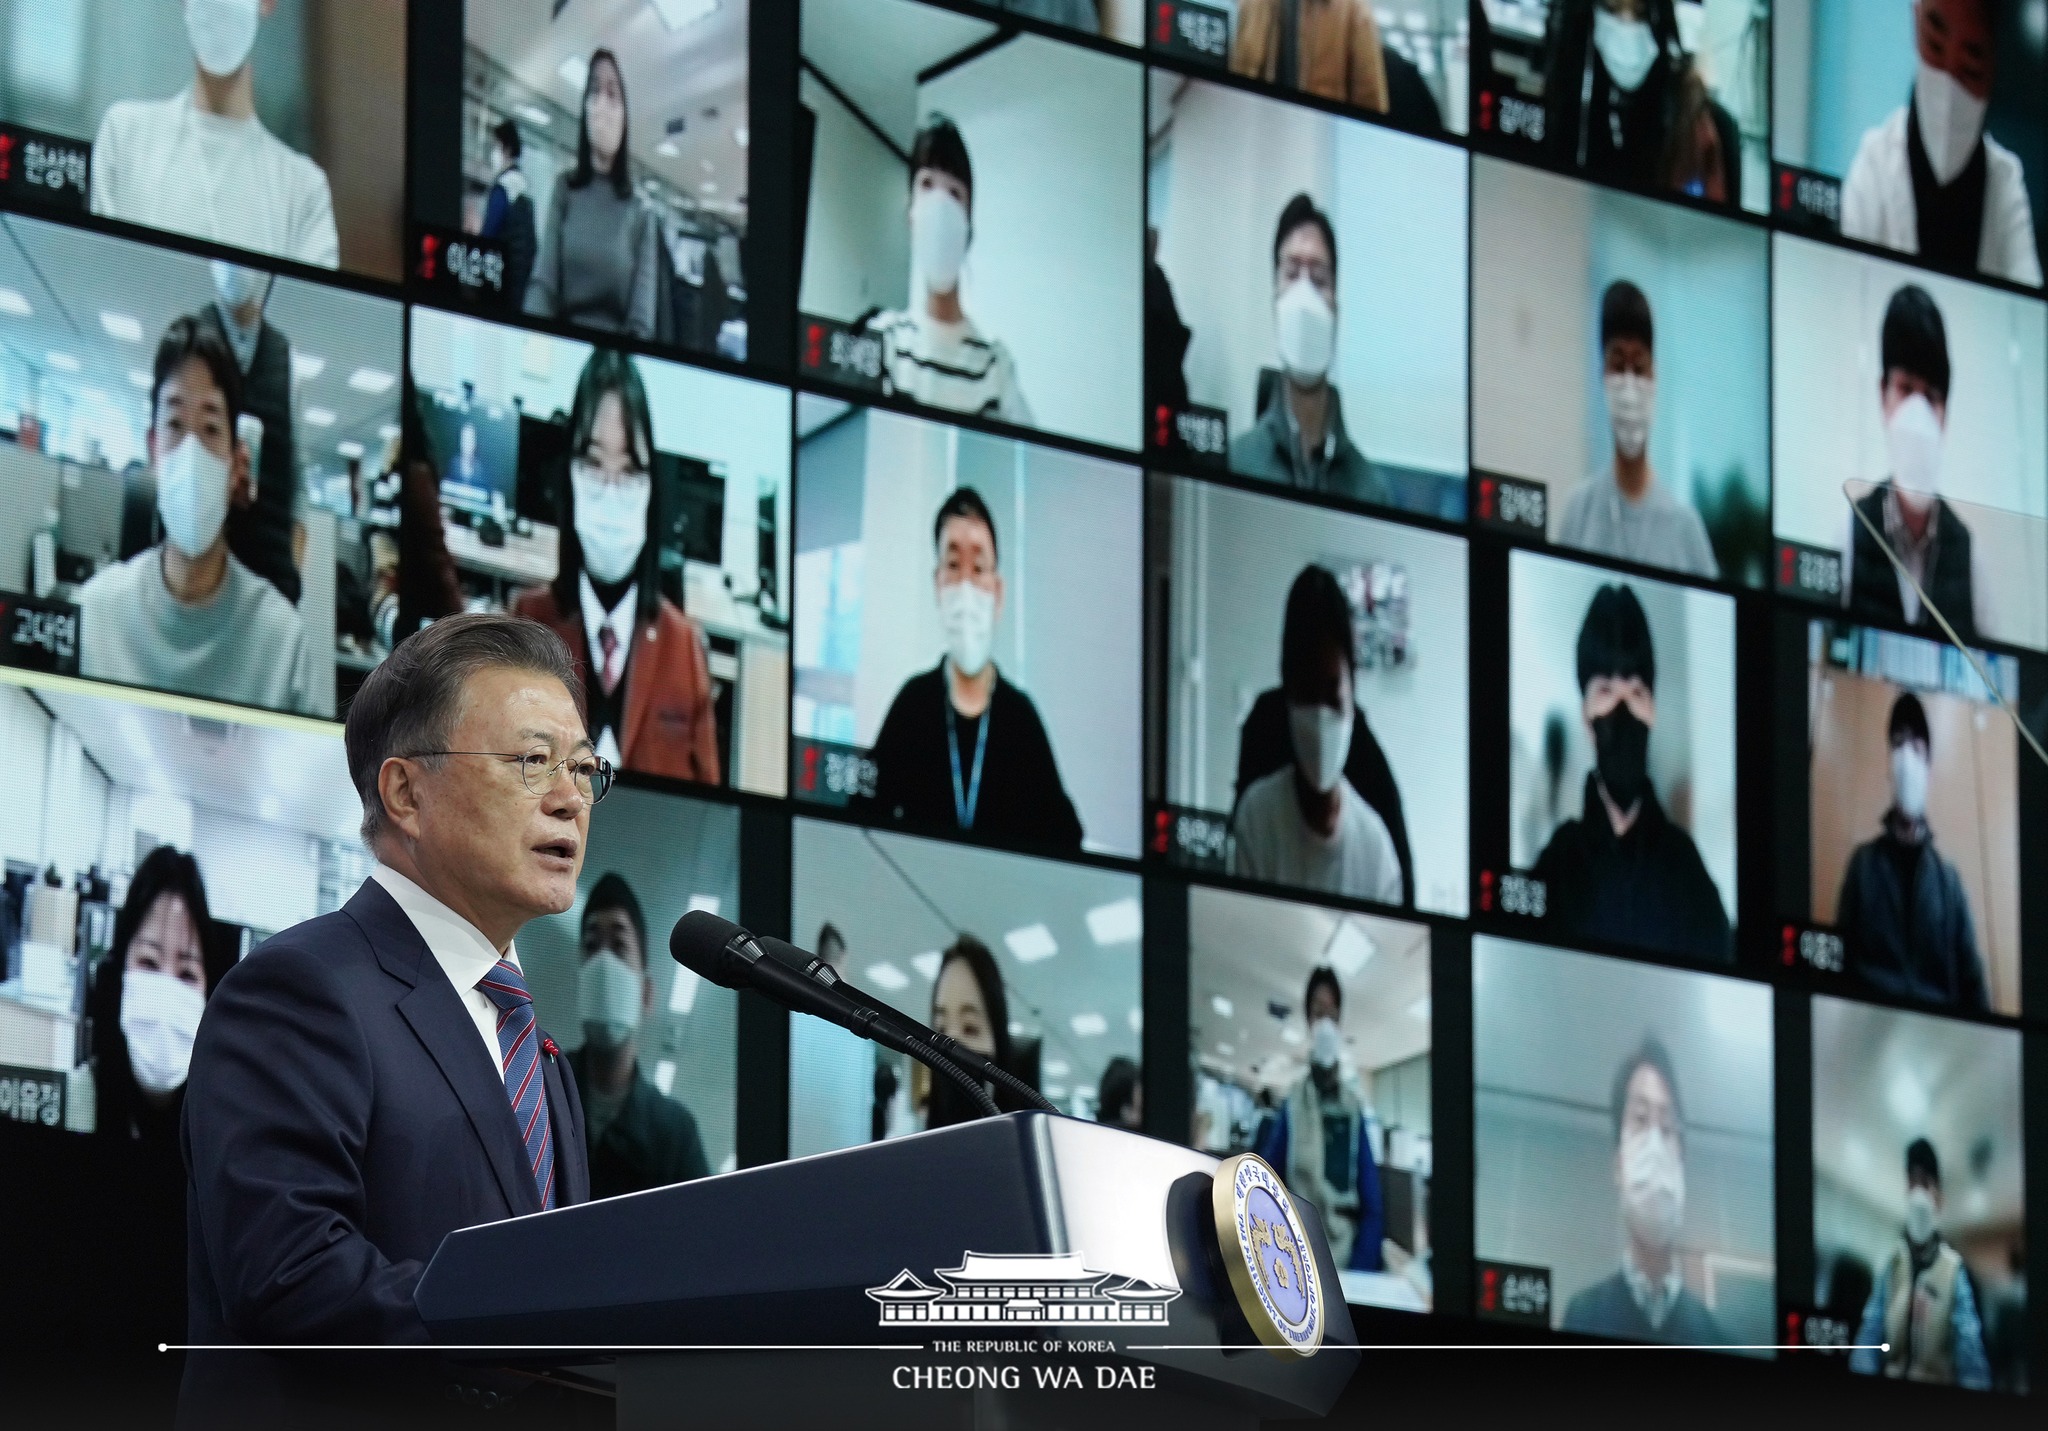 President Moon Jae-in on Jan. 11 gives a congratulatory speech at the groundbreaking ceremony for LG Battery Core Material, a project conducted under the Gumi-style model of job creation, at Gumi Convention Center in Gumi, Gyeongsangbuk-do Province.